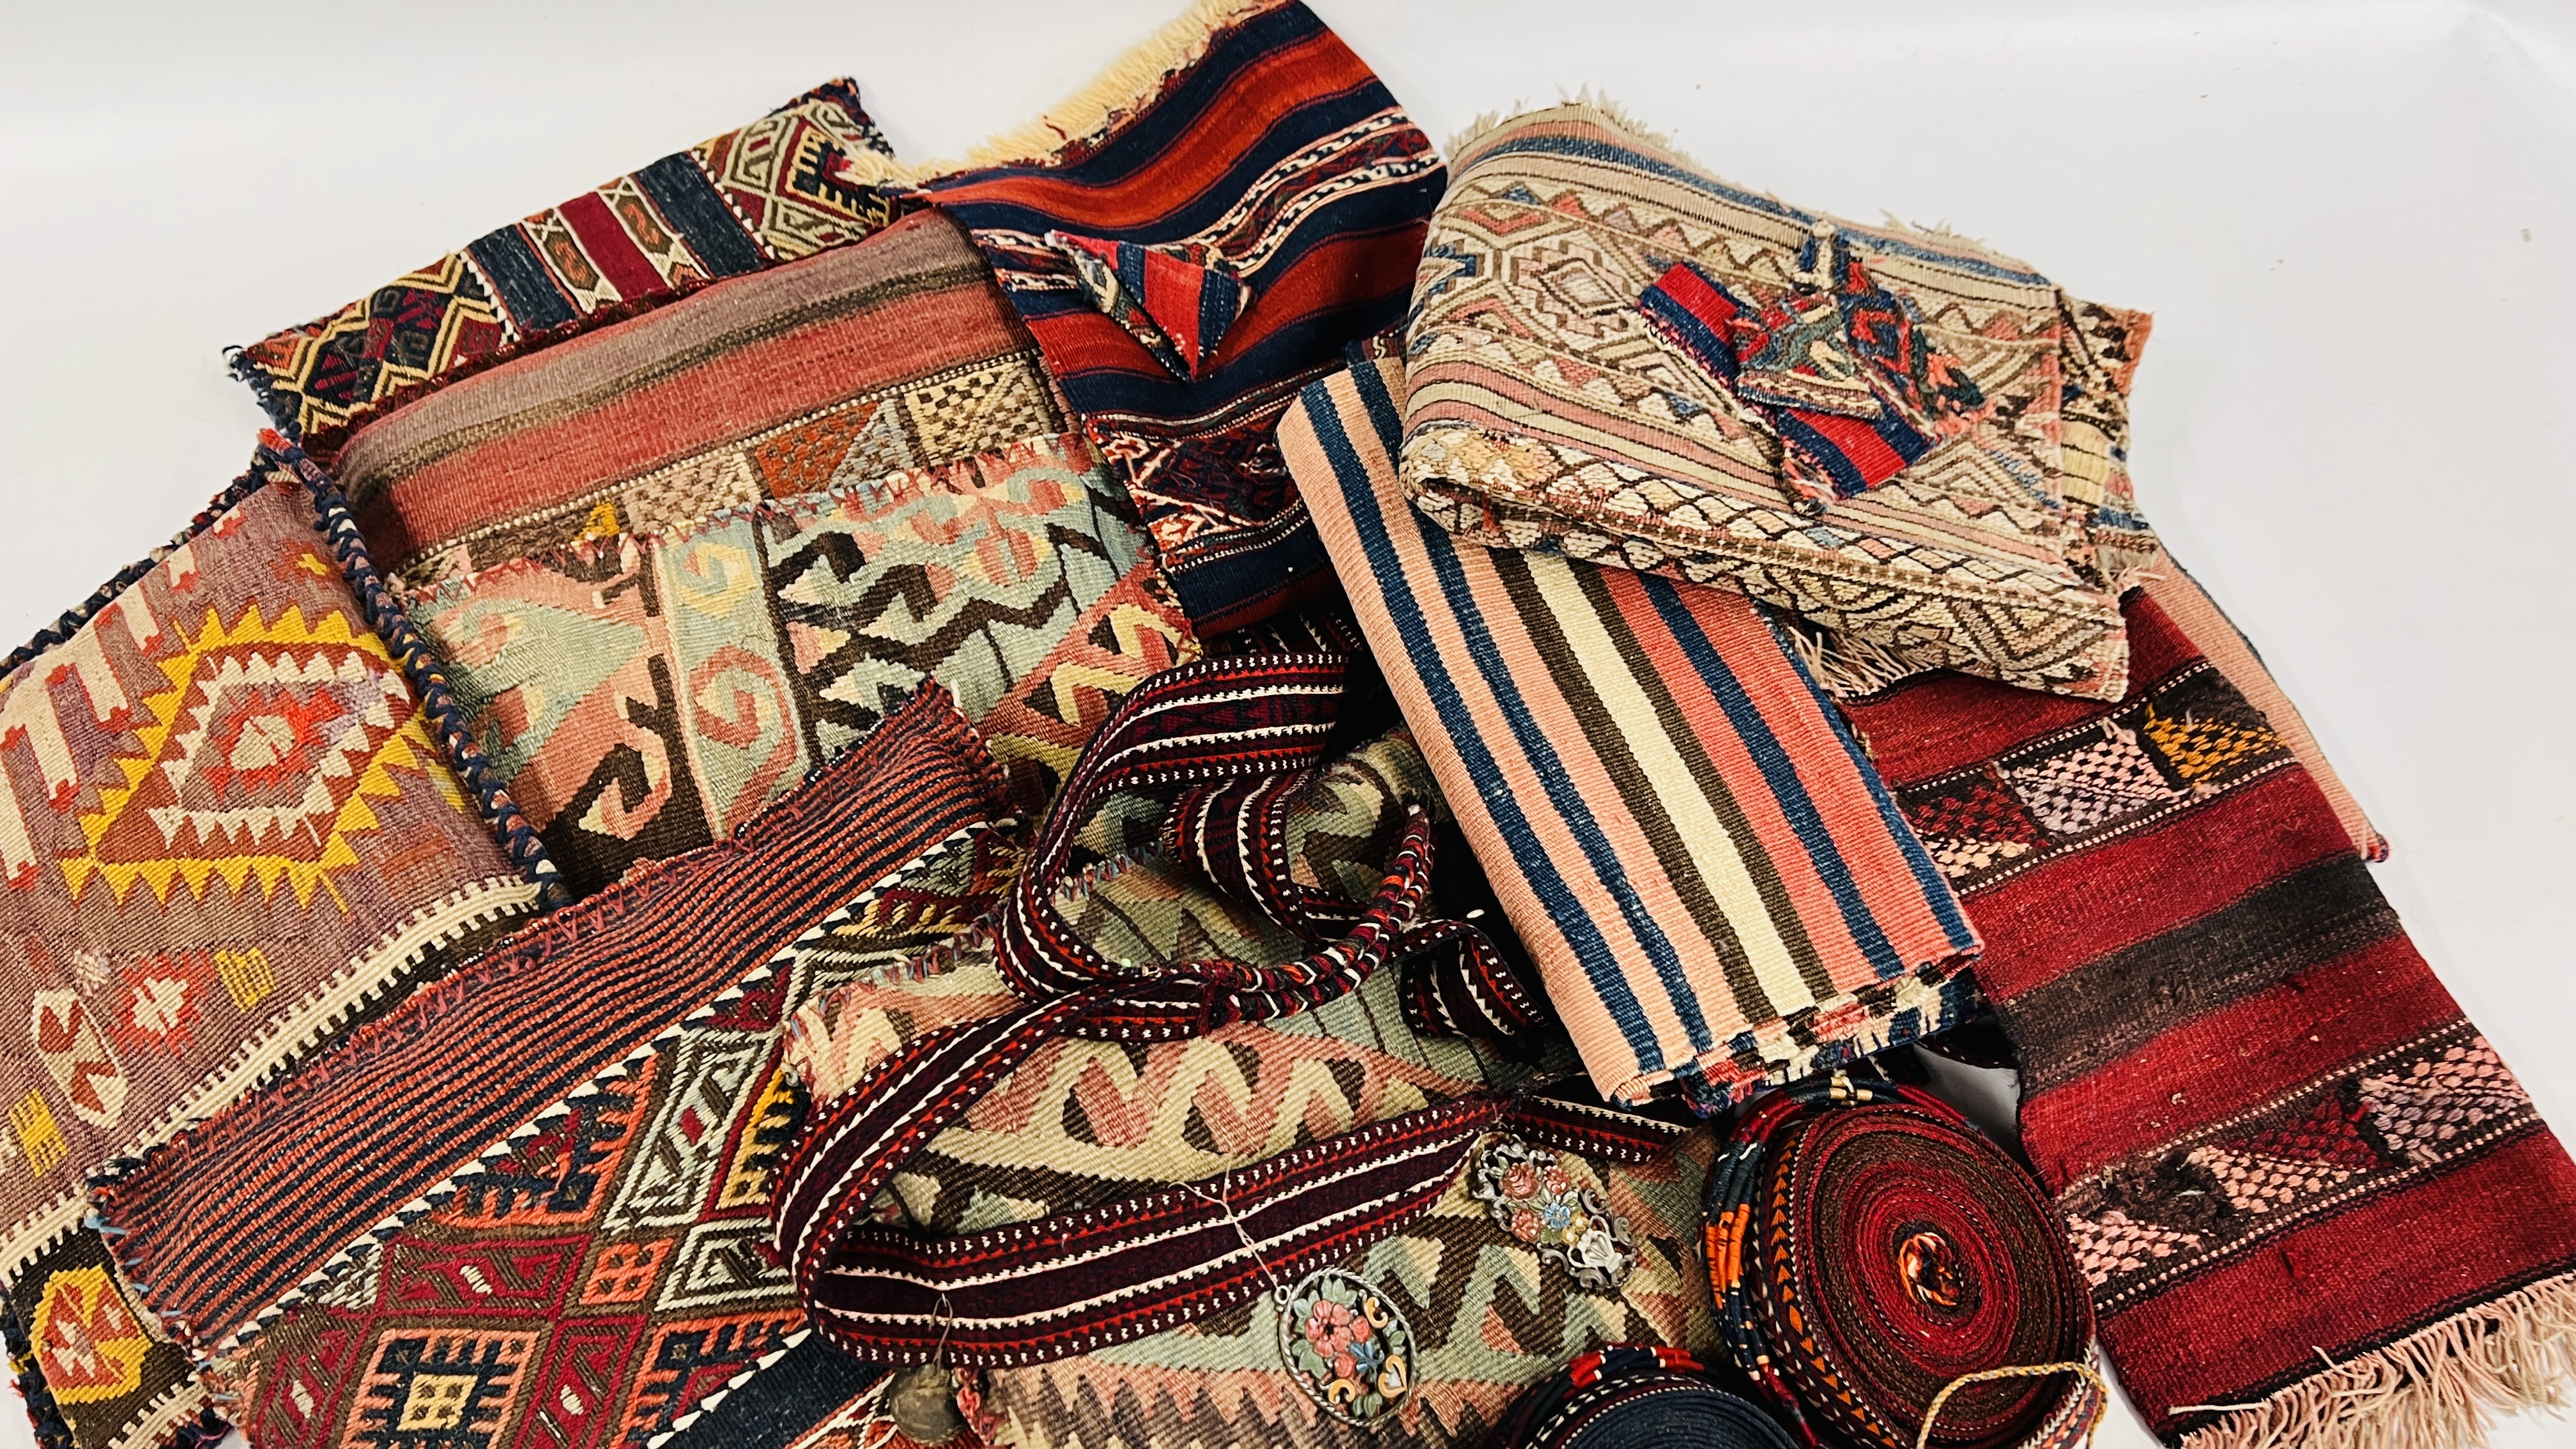 A BOX OF MIDDLE EASTERN AND ASIAN STYLE CARPET / HANDCRAFTED TEXTILE CUSHIONS AND A BOX OF TEXTILE - Image 4 of 12